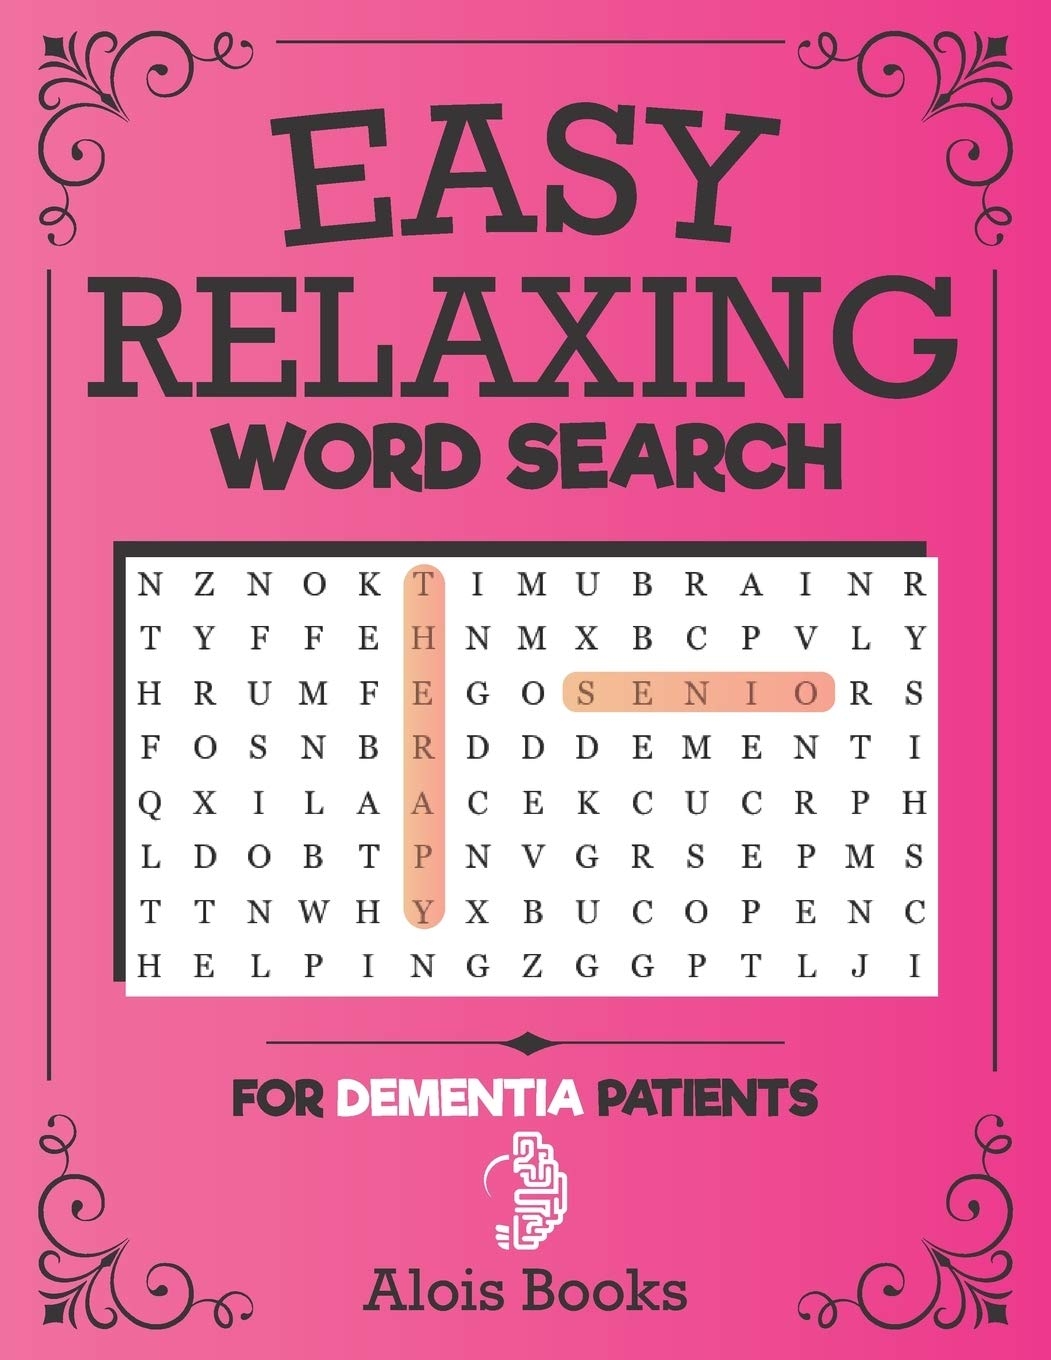 Easy Relaxing Word Search For Dementia Patients A Hunting Search Puzzle Books For Older Adults reduced Memory Loss And Increased Mental Capacity Books Alois Amazon de Books